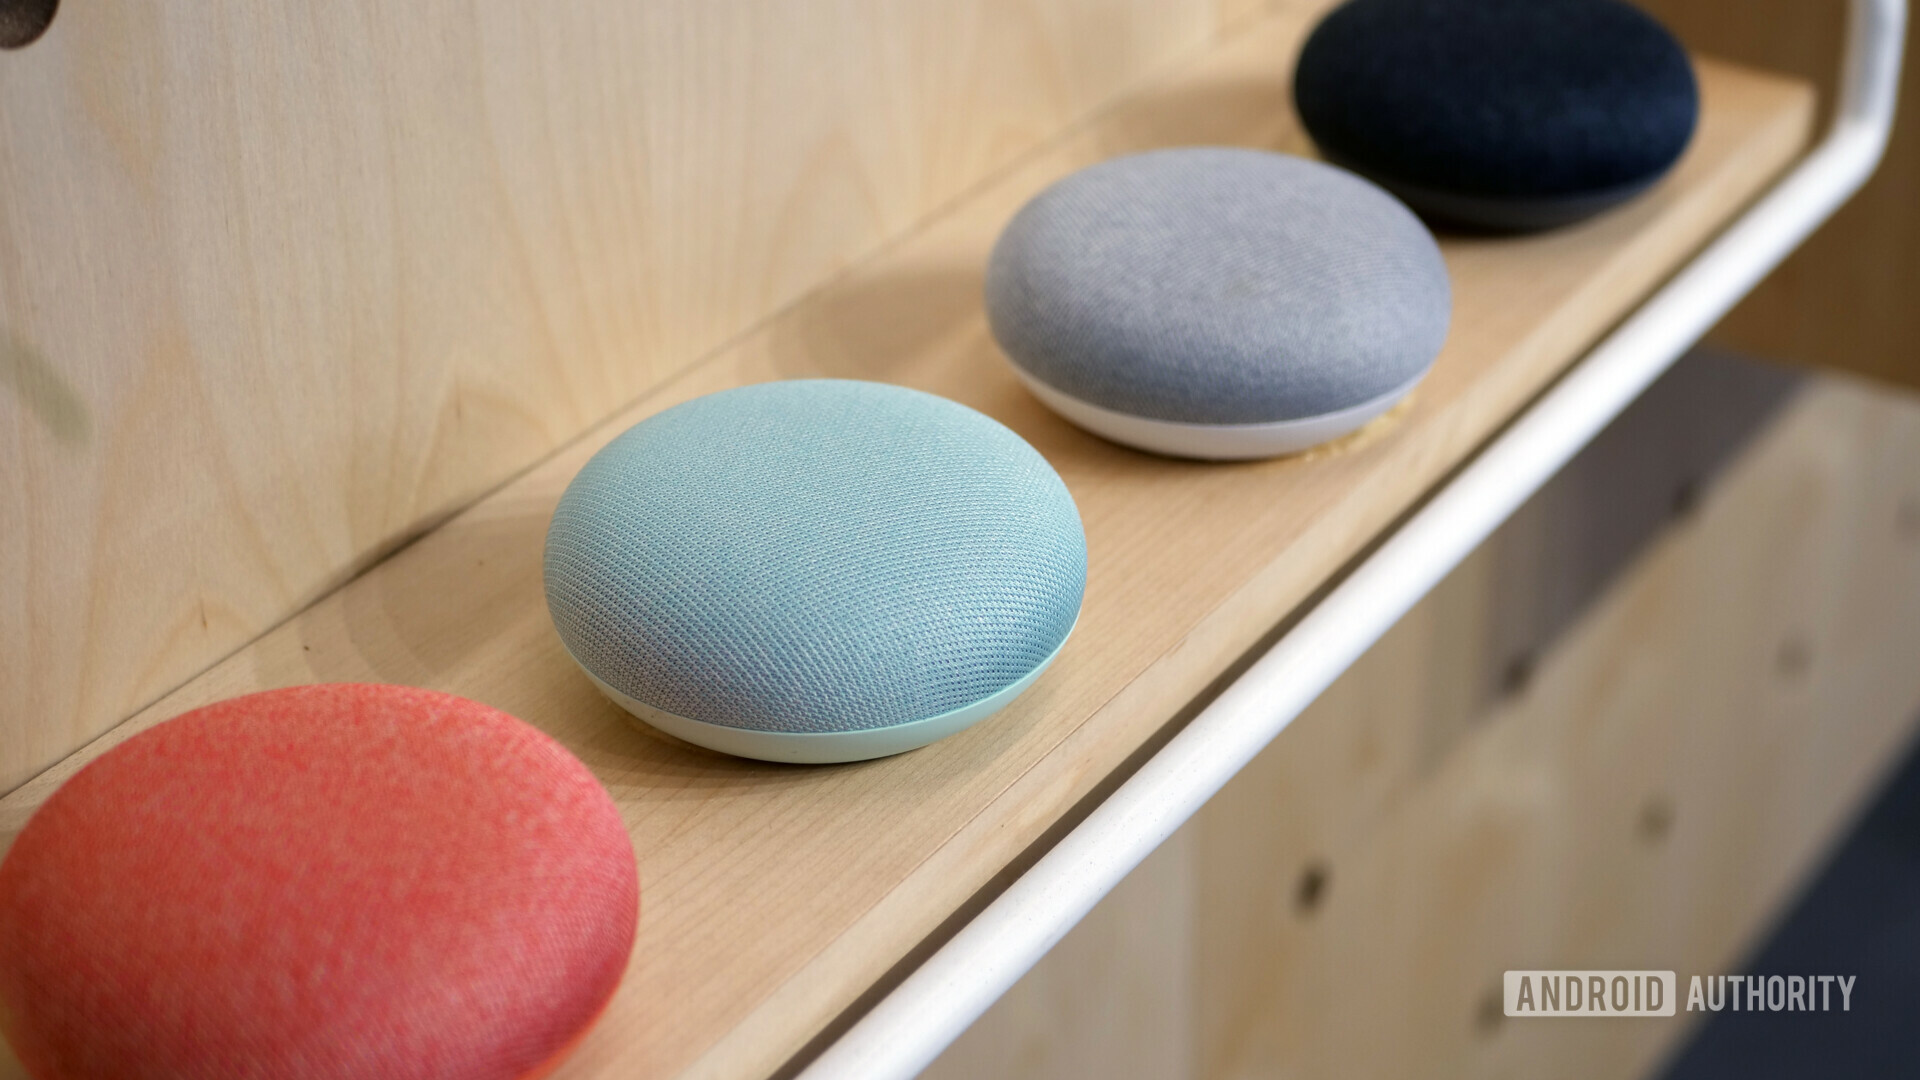 You can get a free Google Home Mini if you're a Google One user in the UK or Italy.